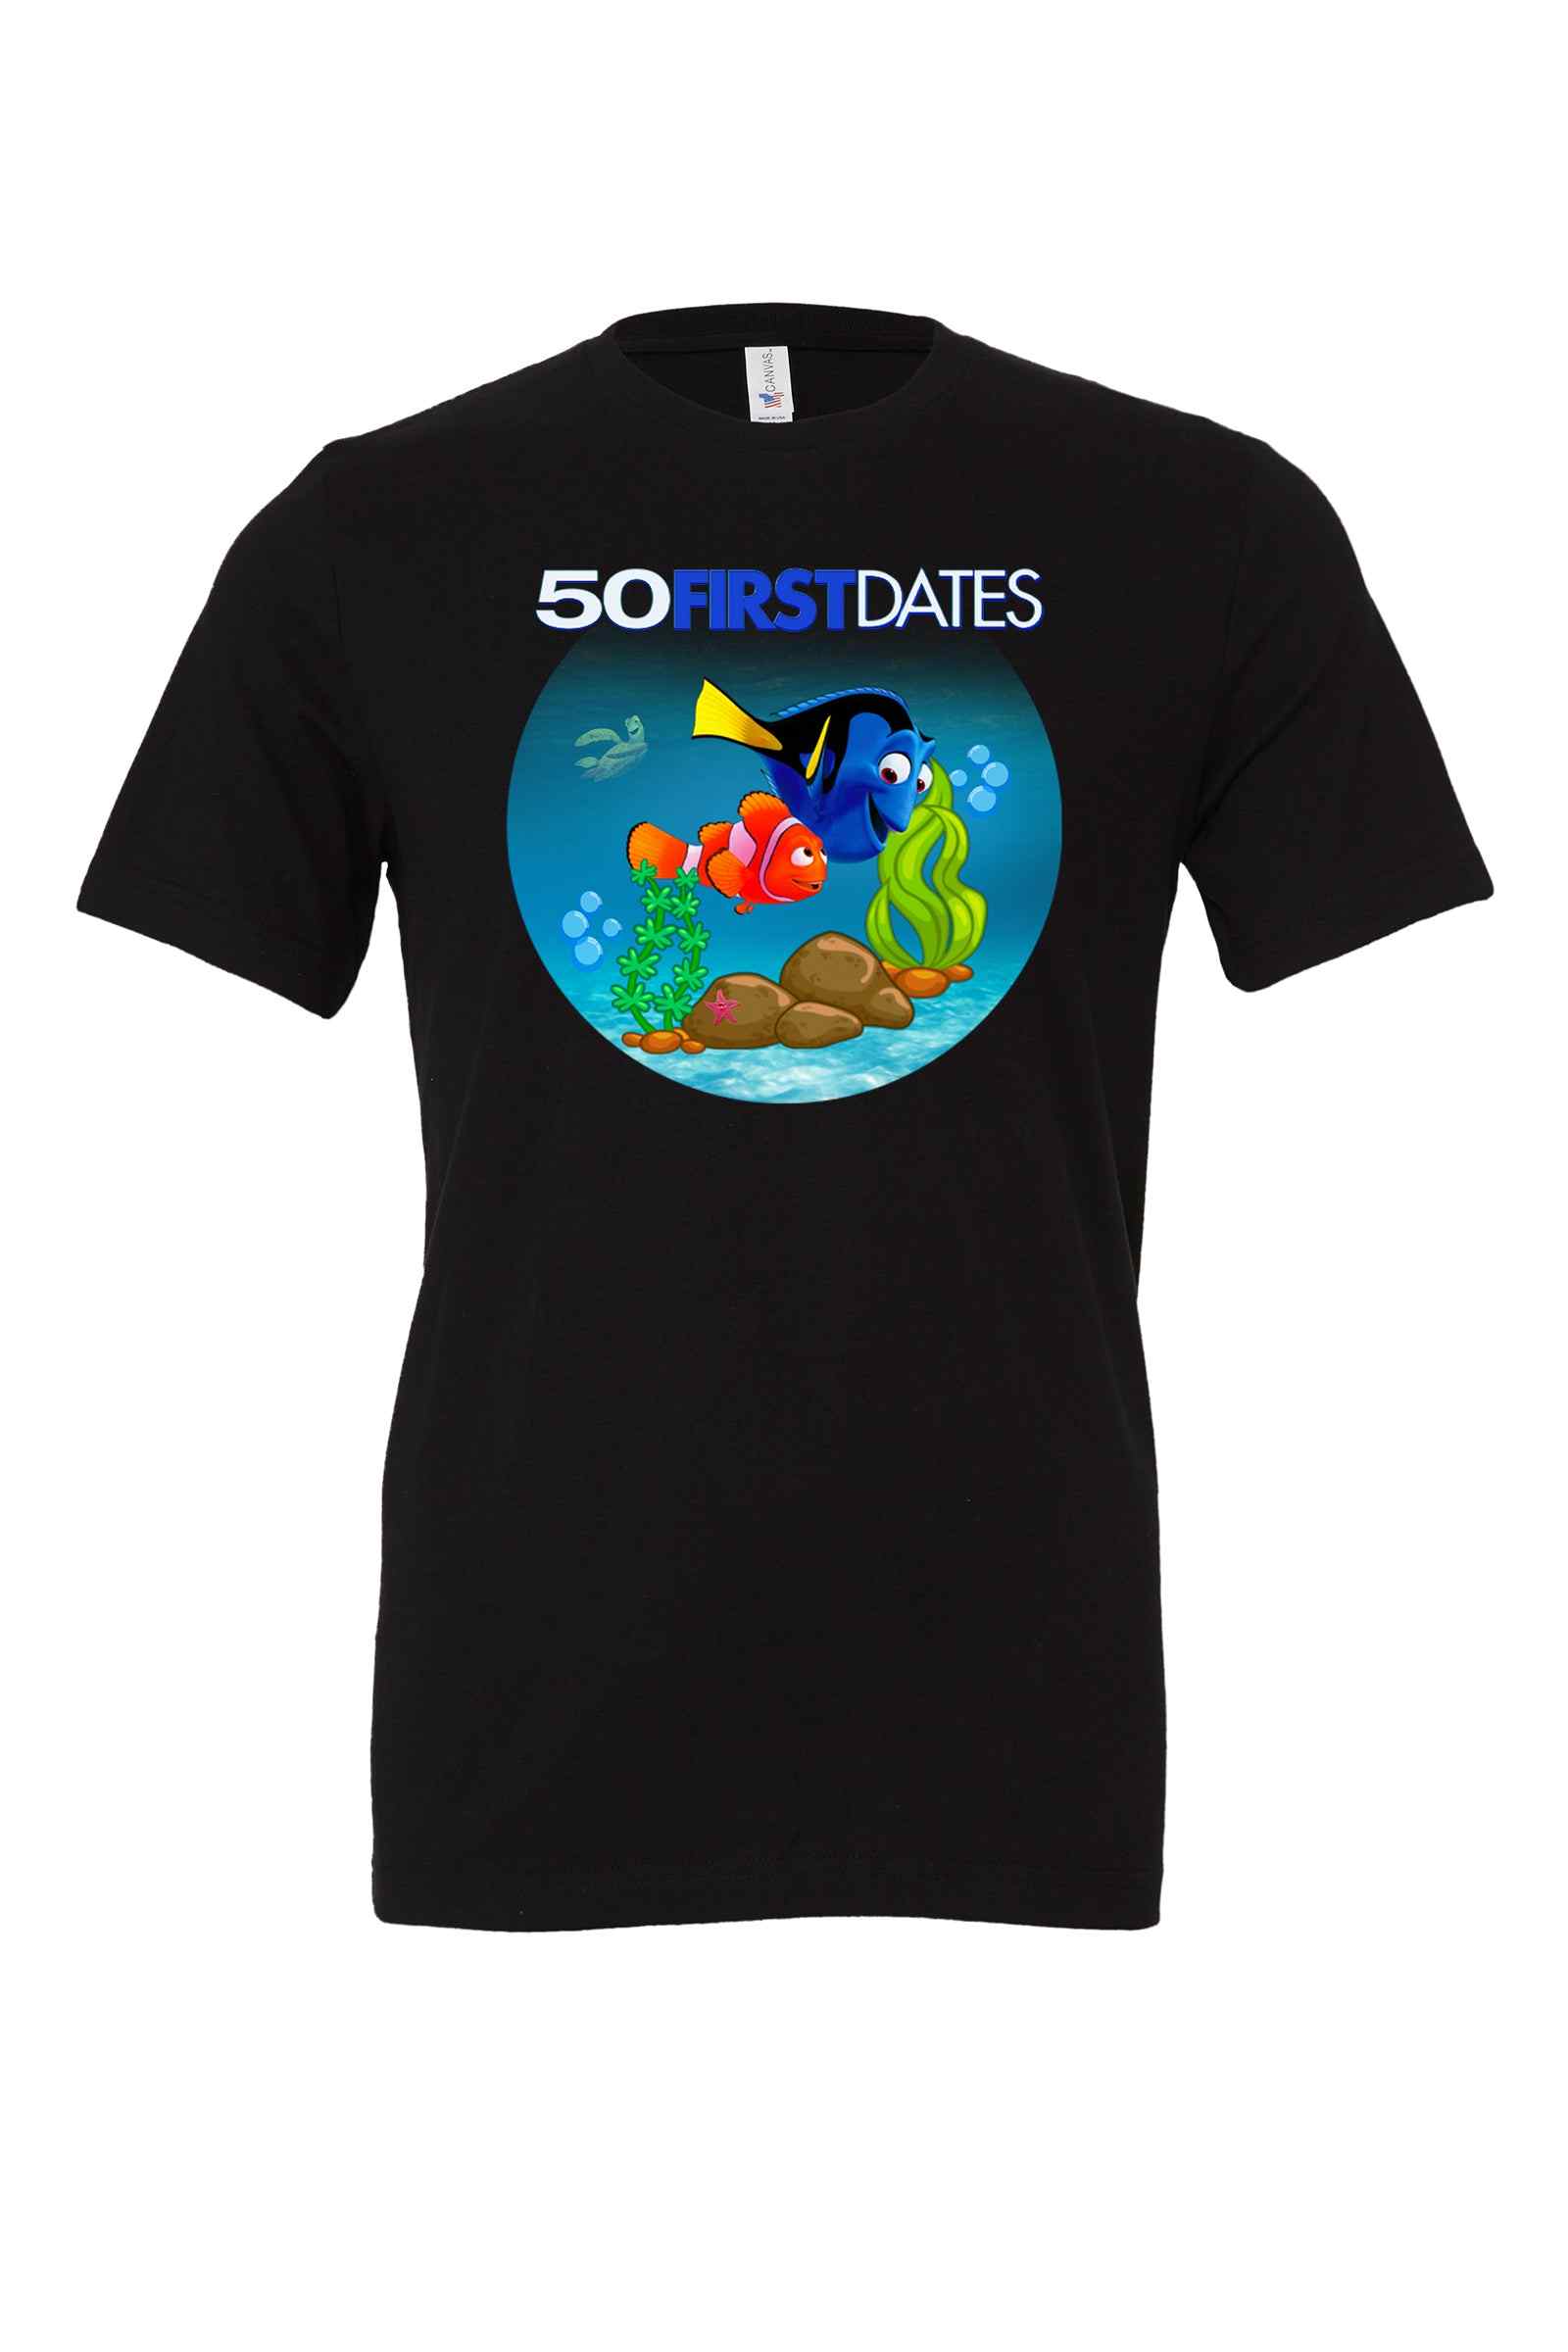 Youth | Fifty First Dates Dory Shirt | Nemo Shirt | Movie Shirt - Dylan's Tees